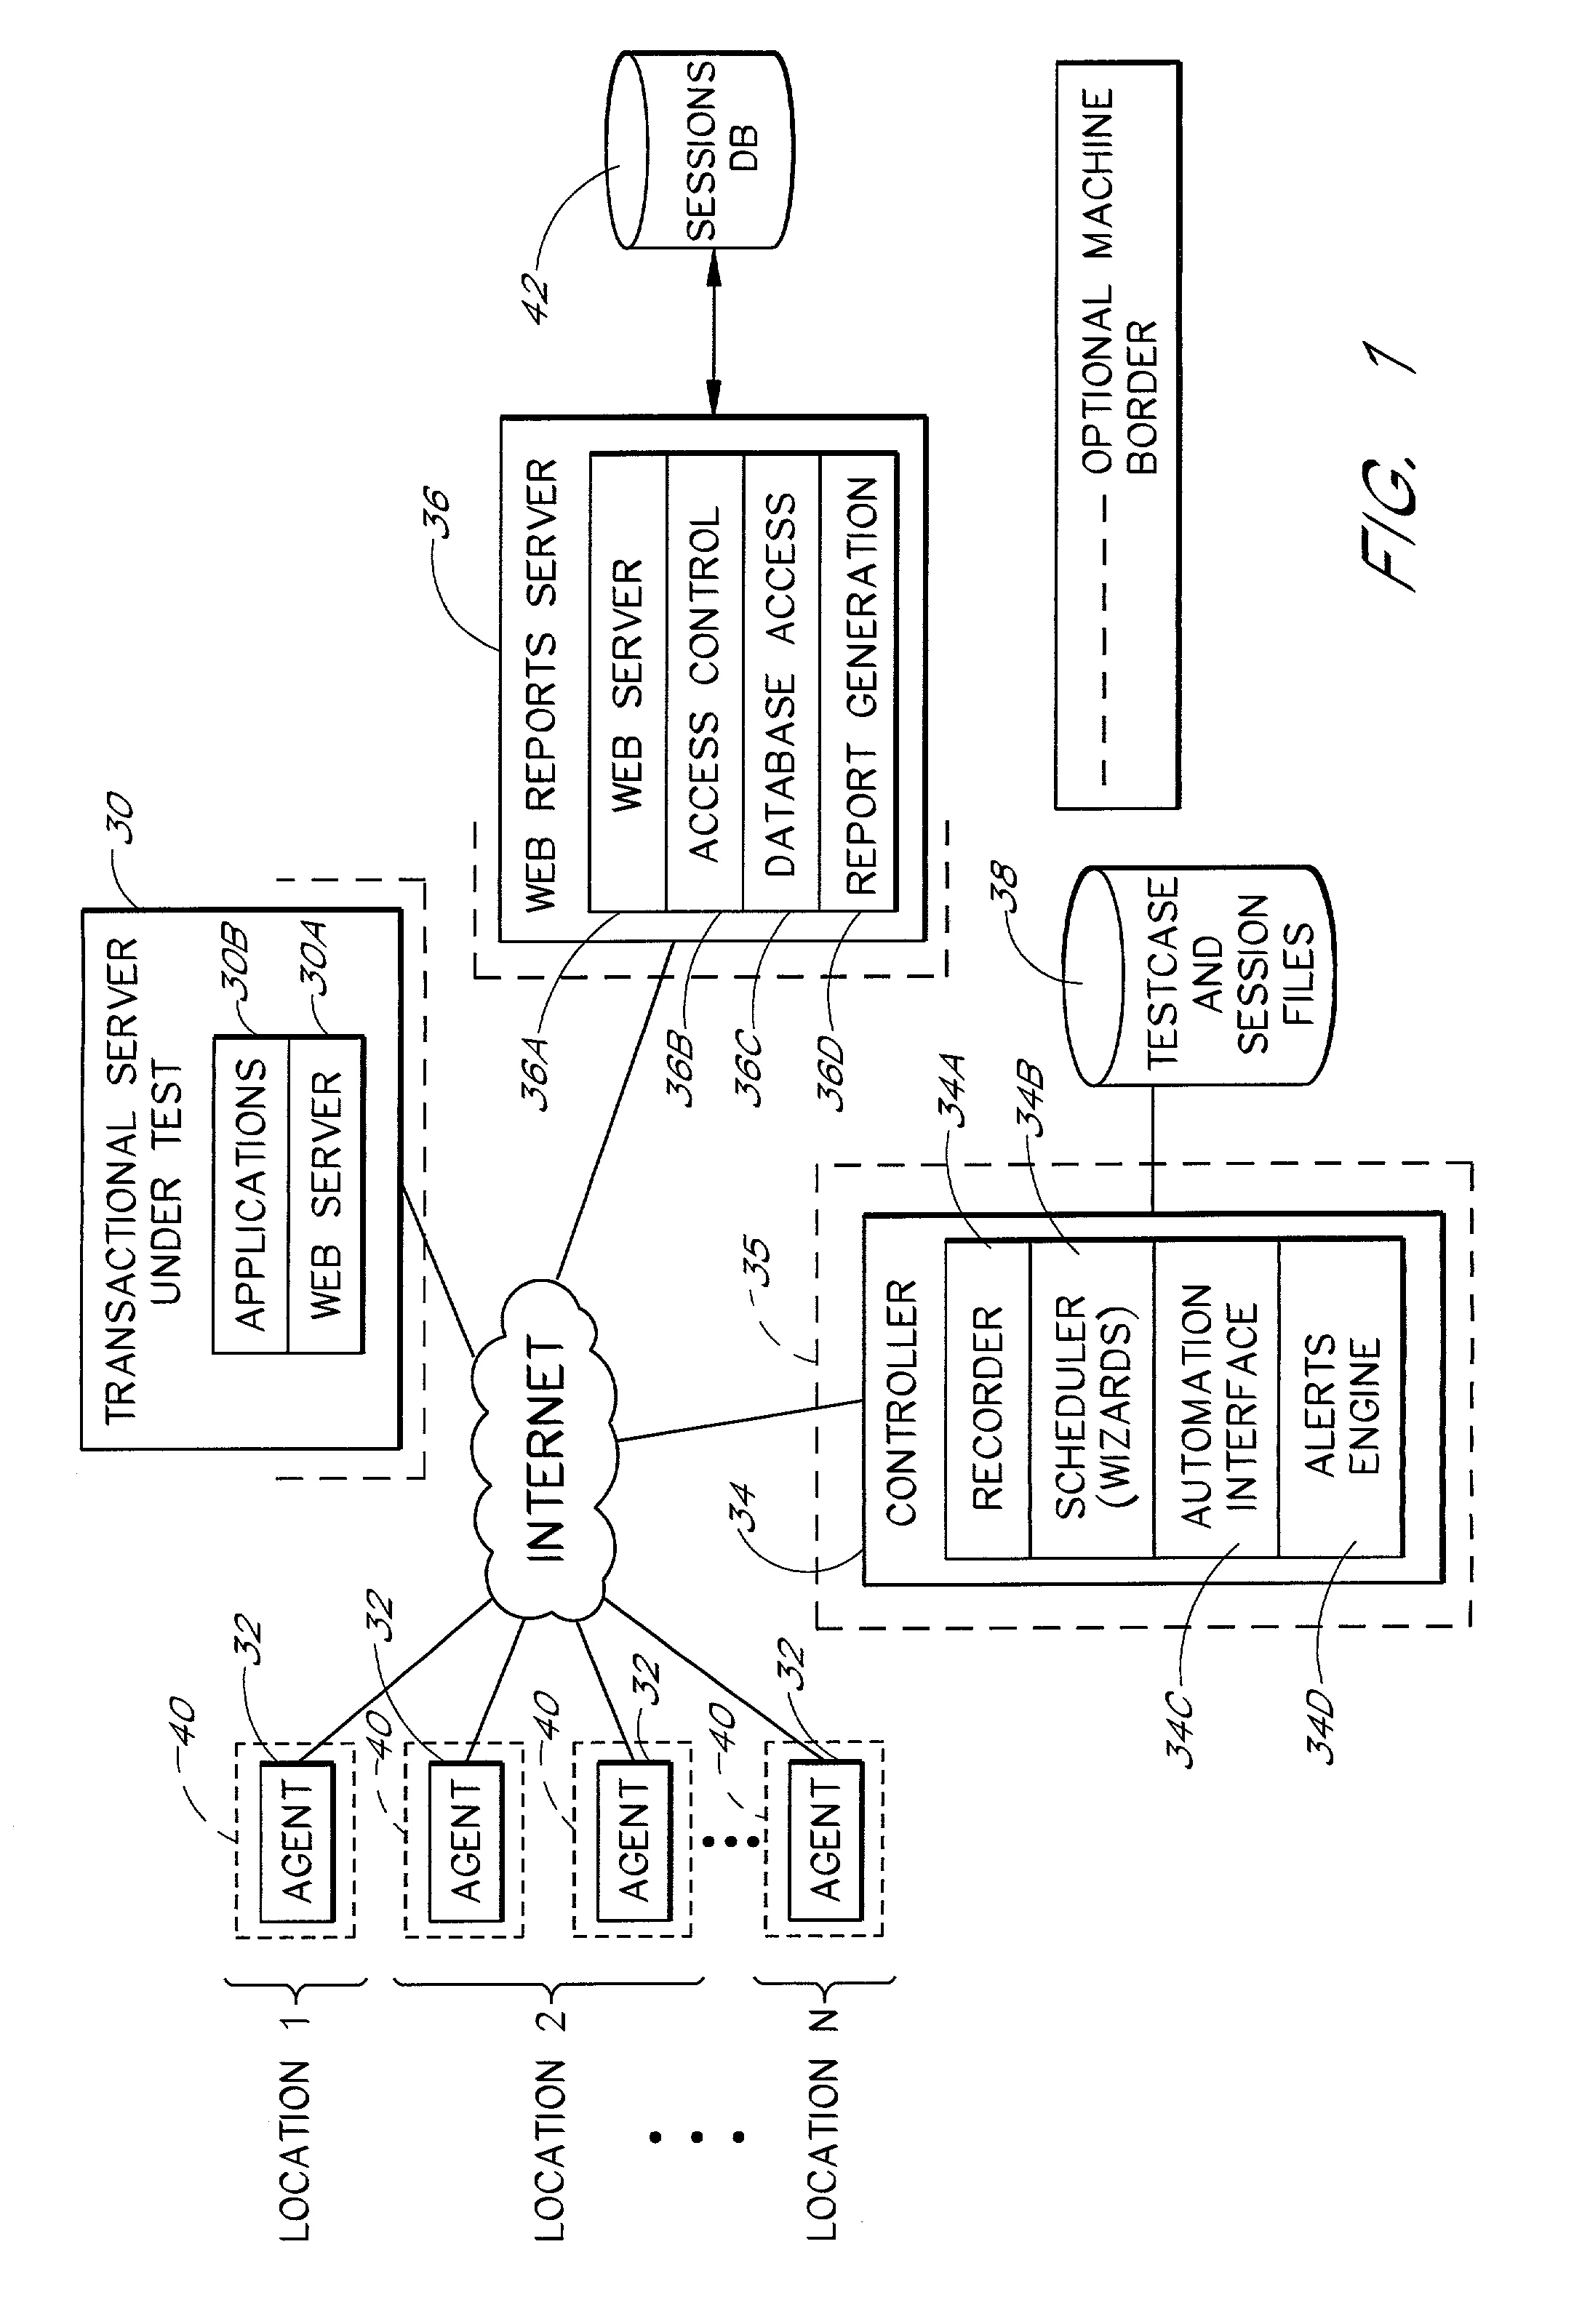 Transaction breakdown feature to facilitate analysis of end user performance of a server system